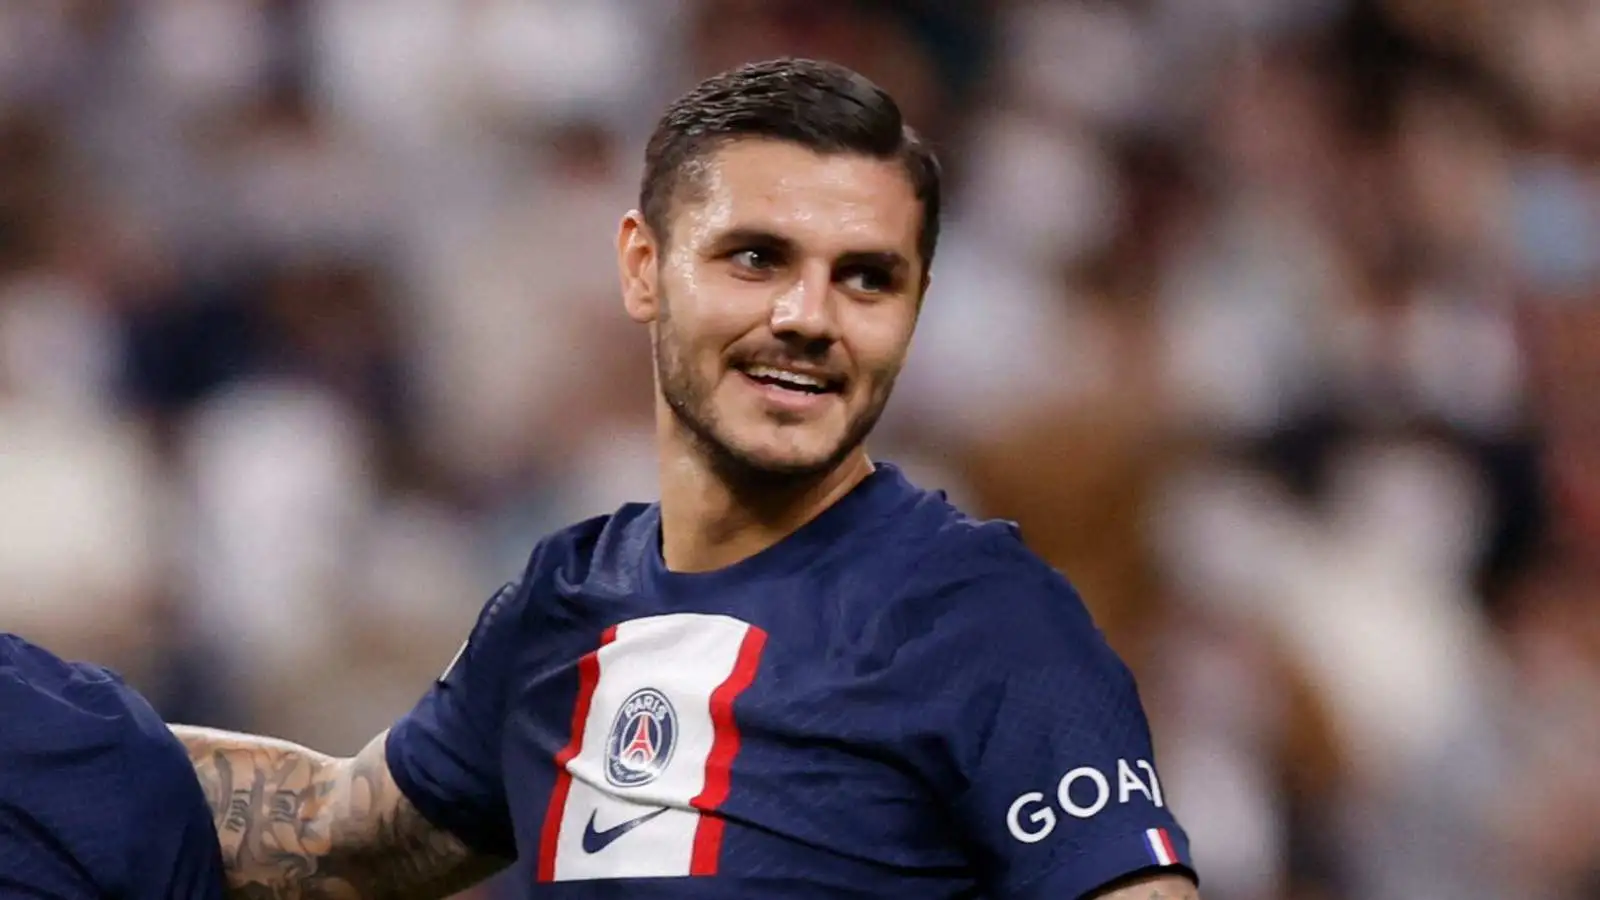 Arsenal 'decided not to proceed' with Mauro Icardi transfer due to